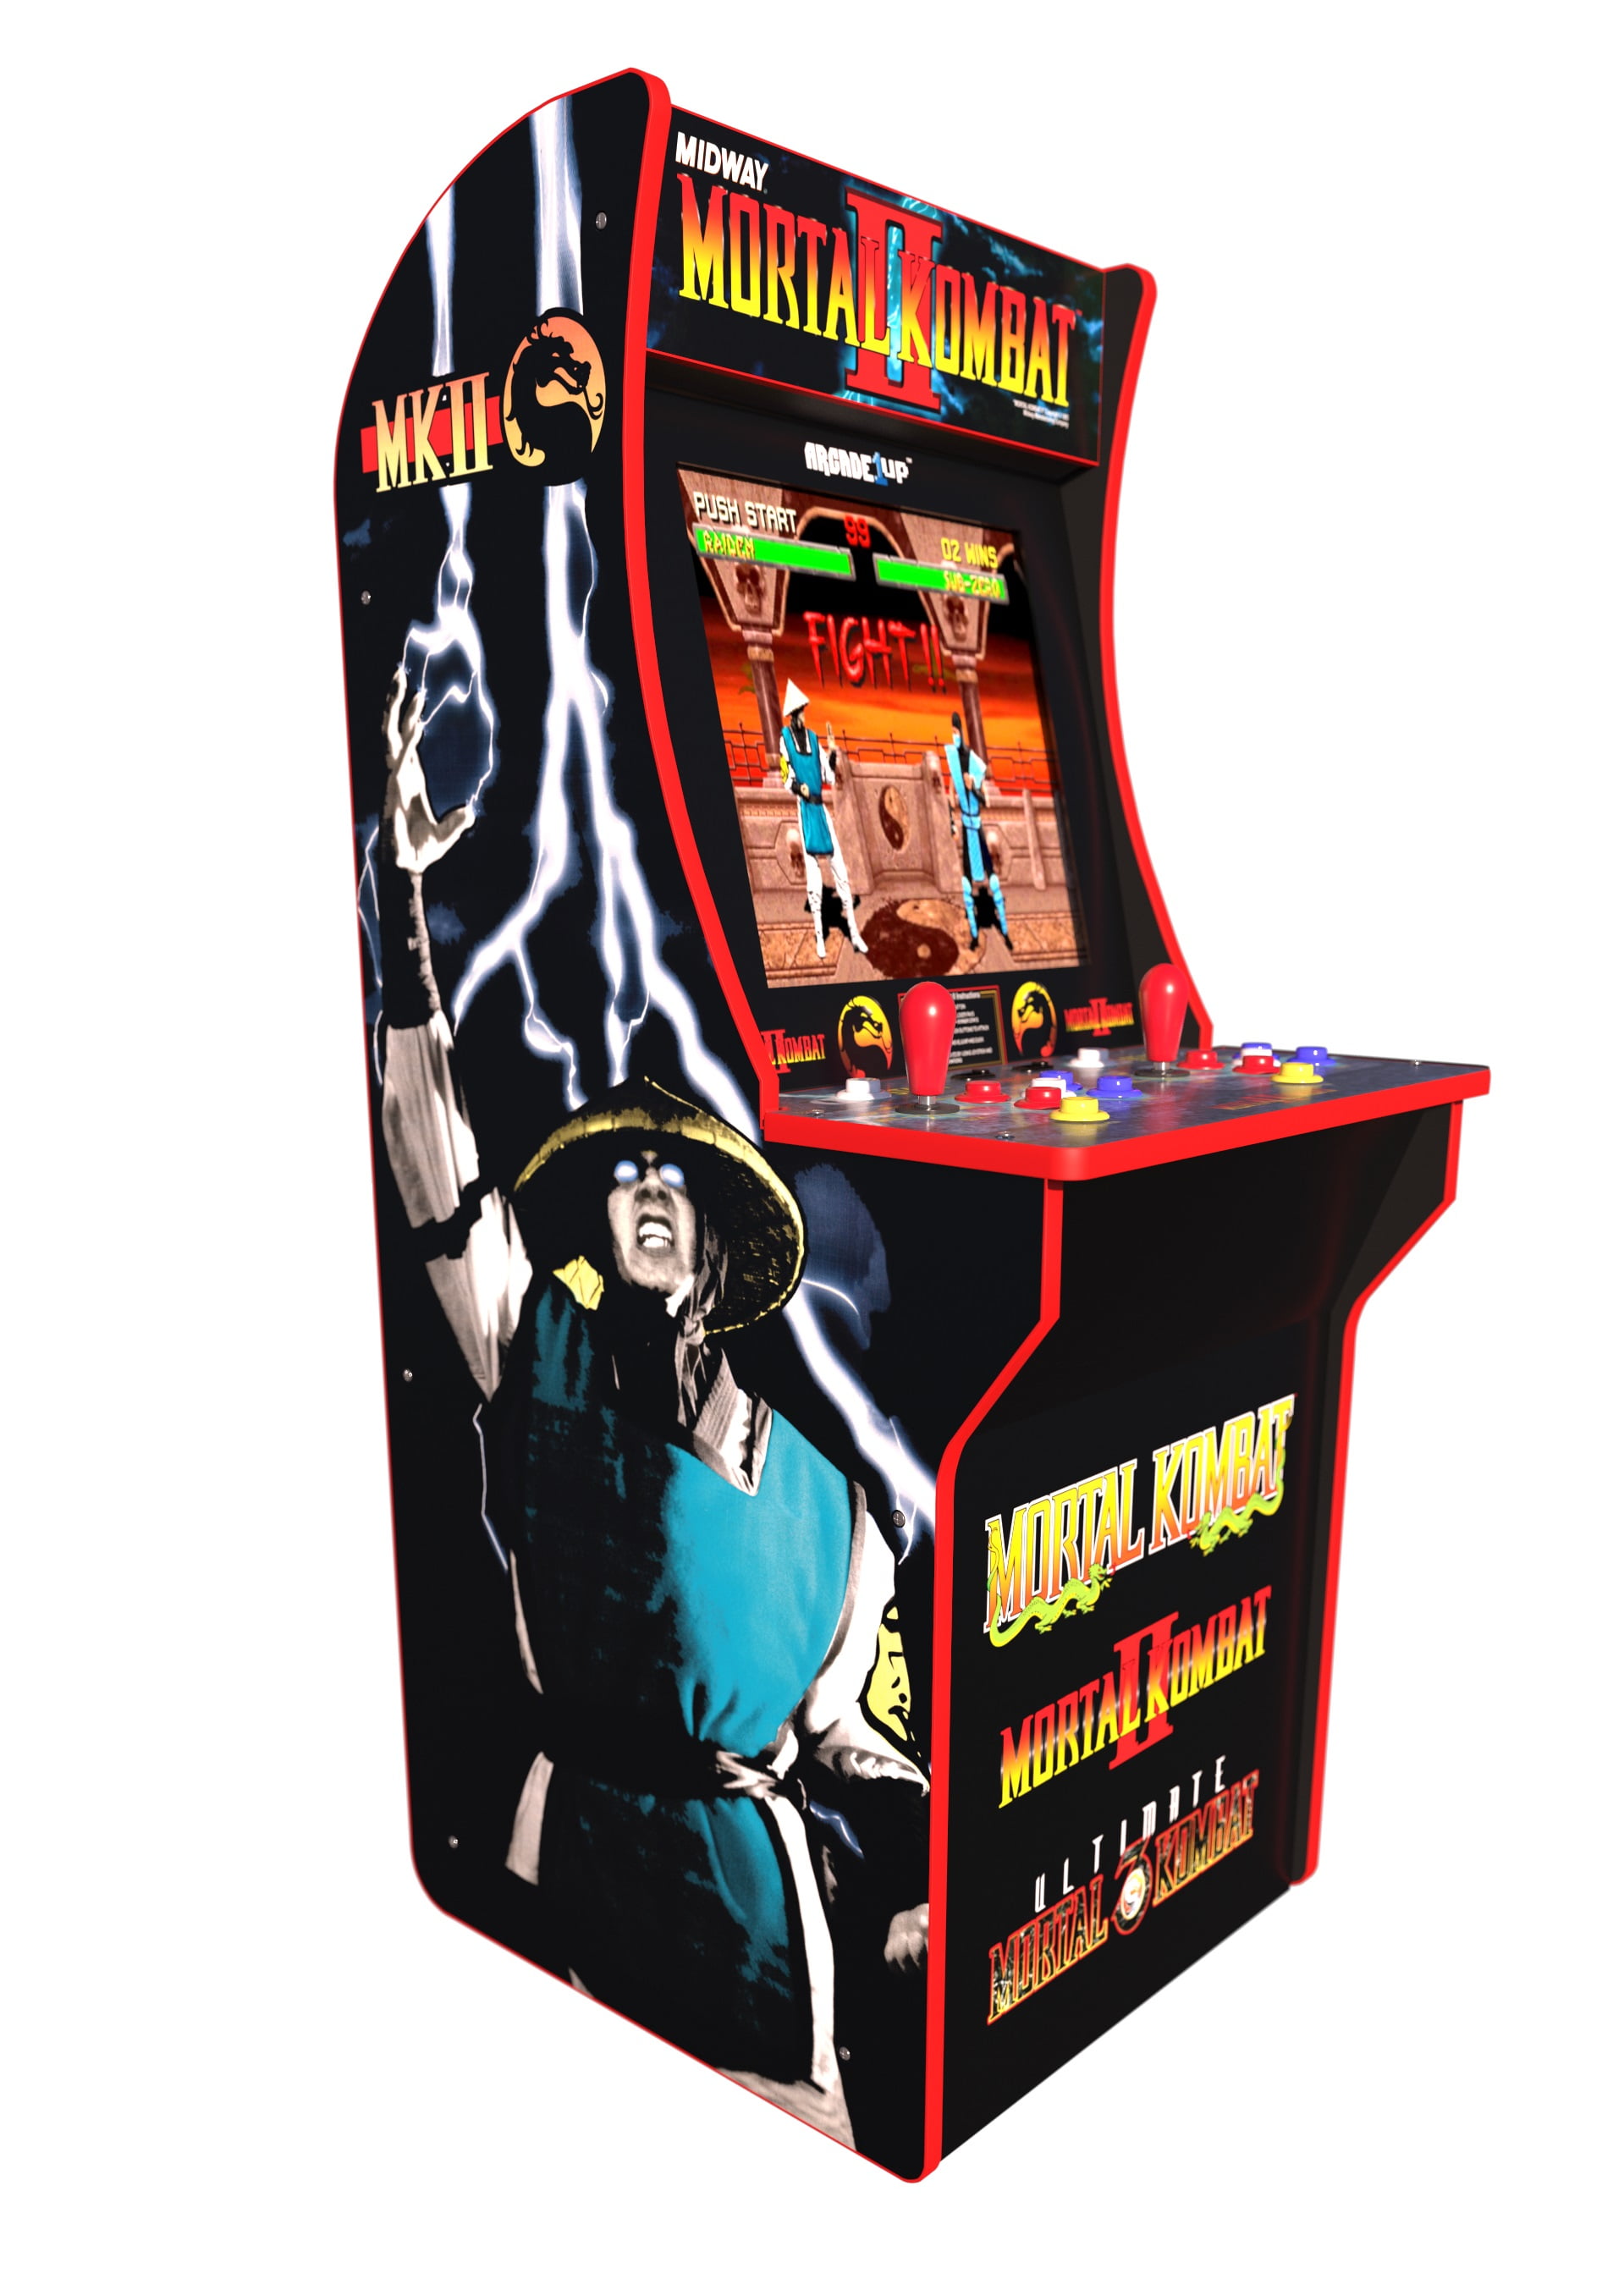 IN HAND Supreme Mortal Kombat by Arcade1UP FREE SHIPPING 